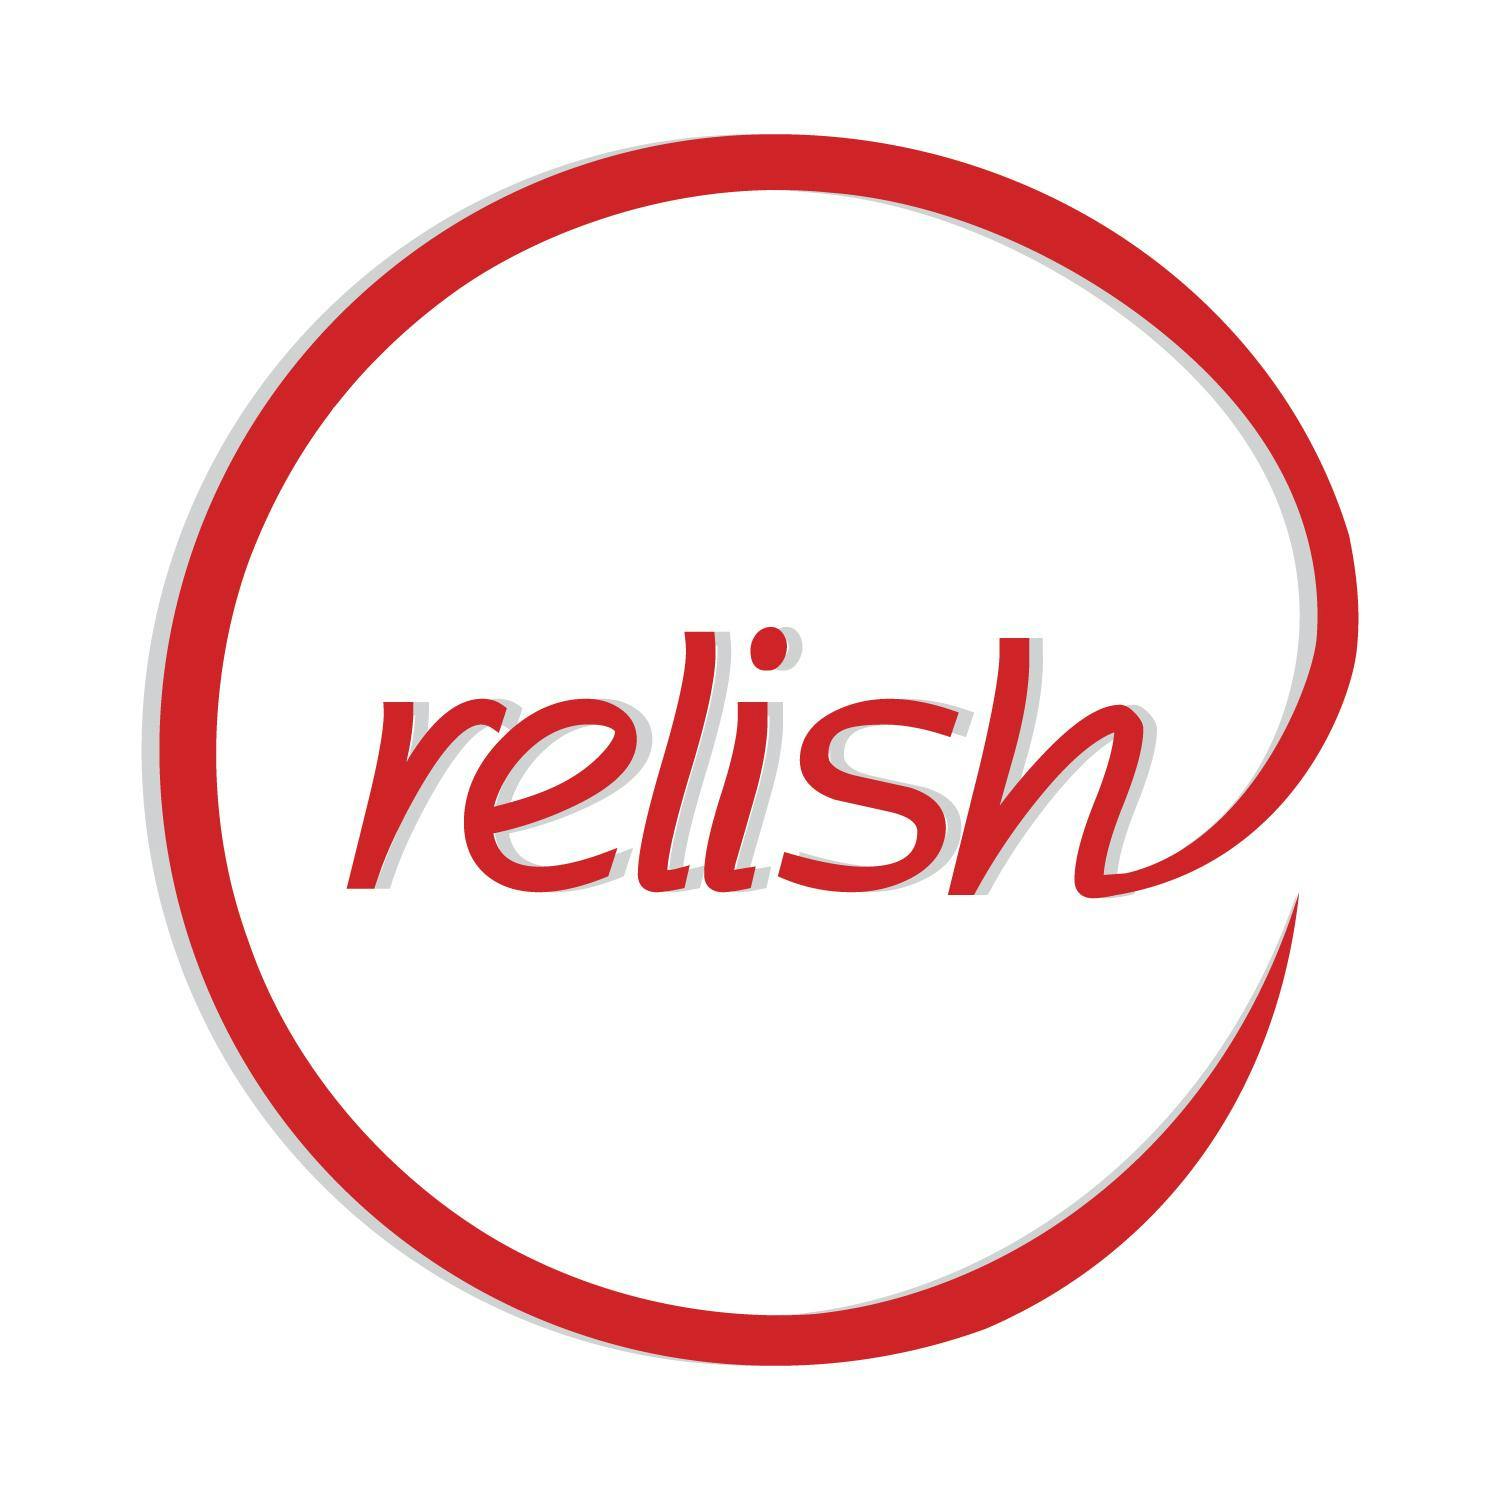 Chicago Speed Dating Singles Event in Chicago - Speed Dating Relish- Age 32-44